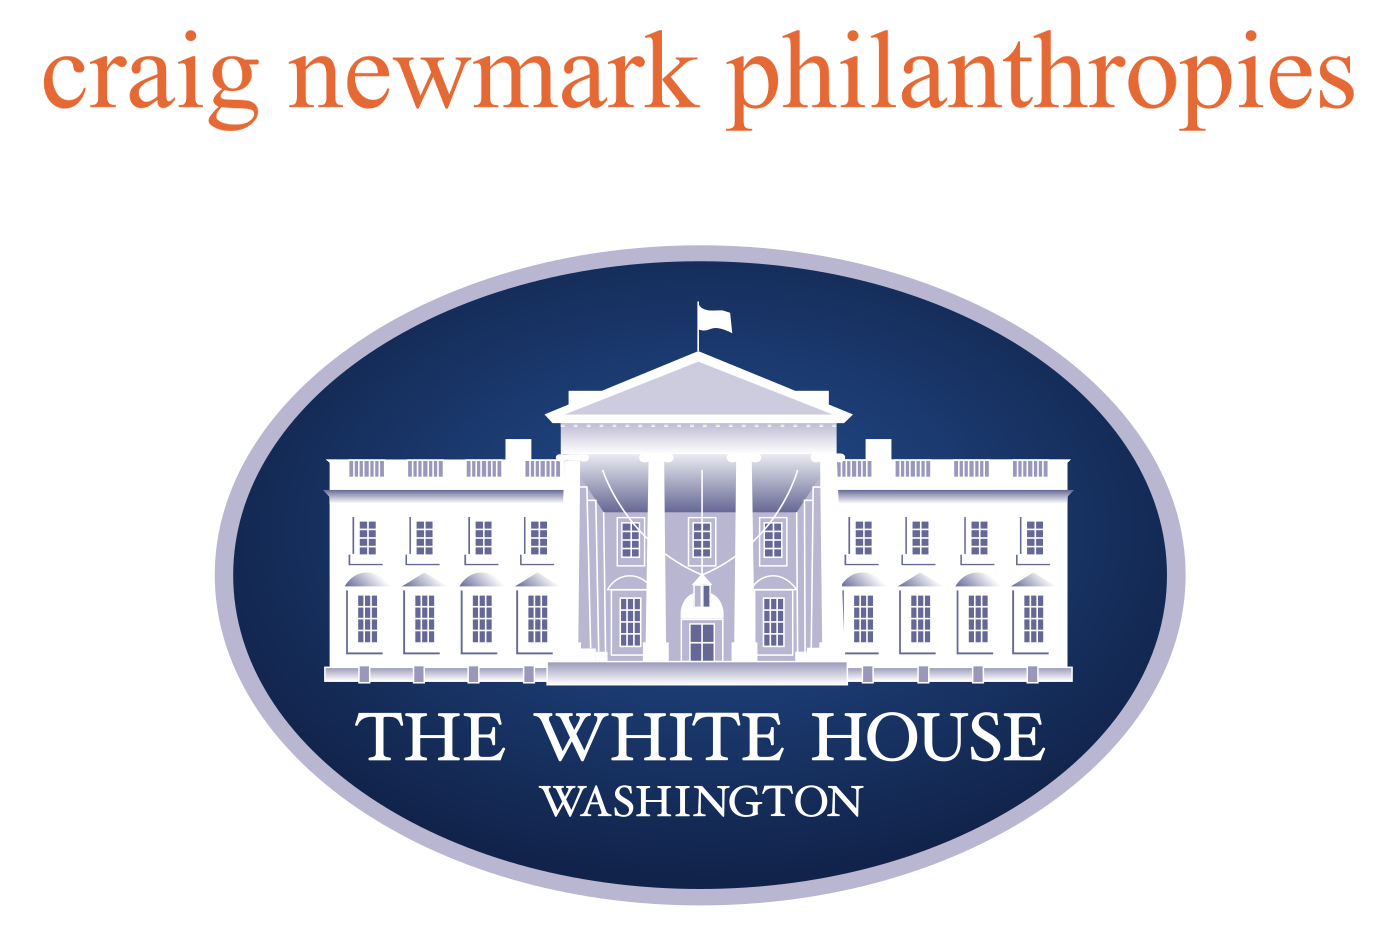 Logos for craig newmark philanthrophies and the White House